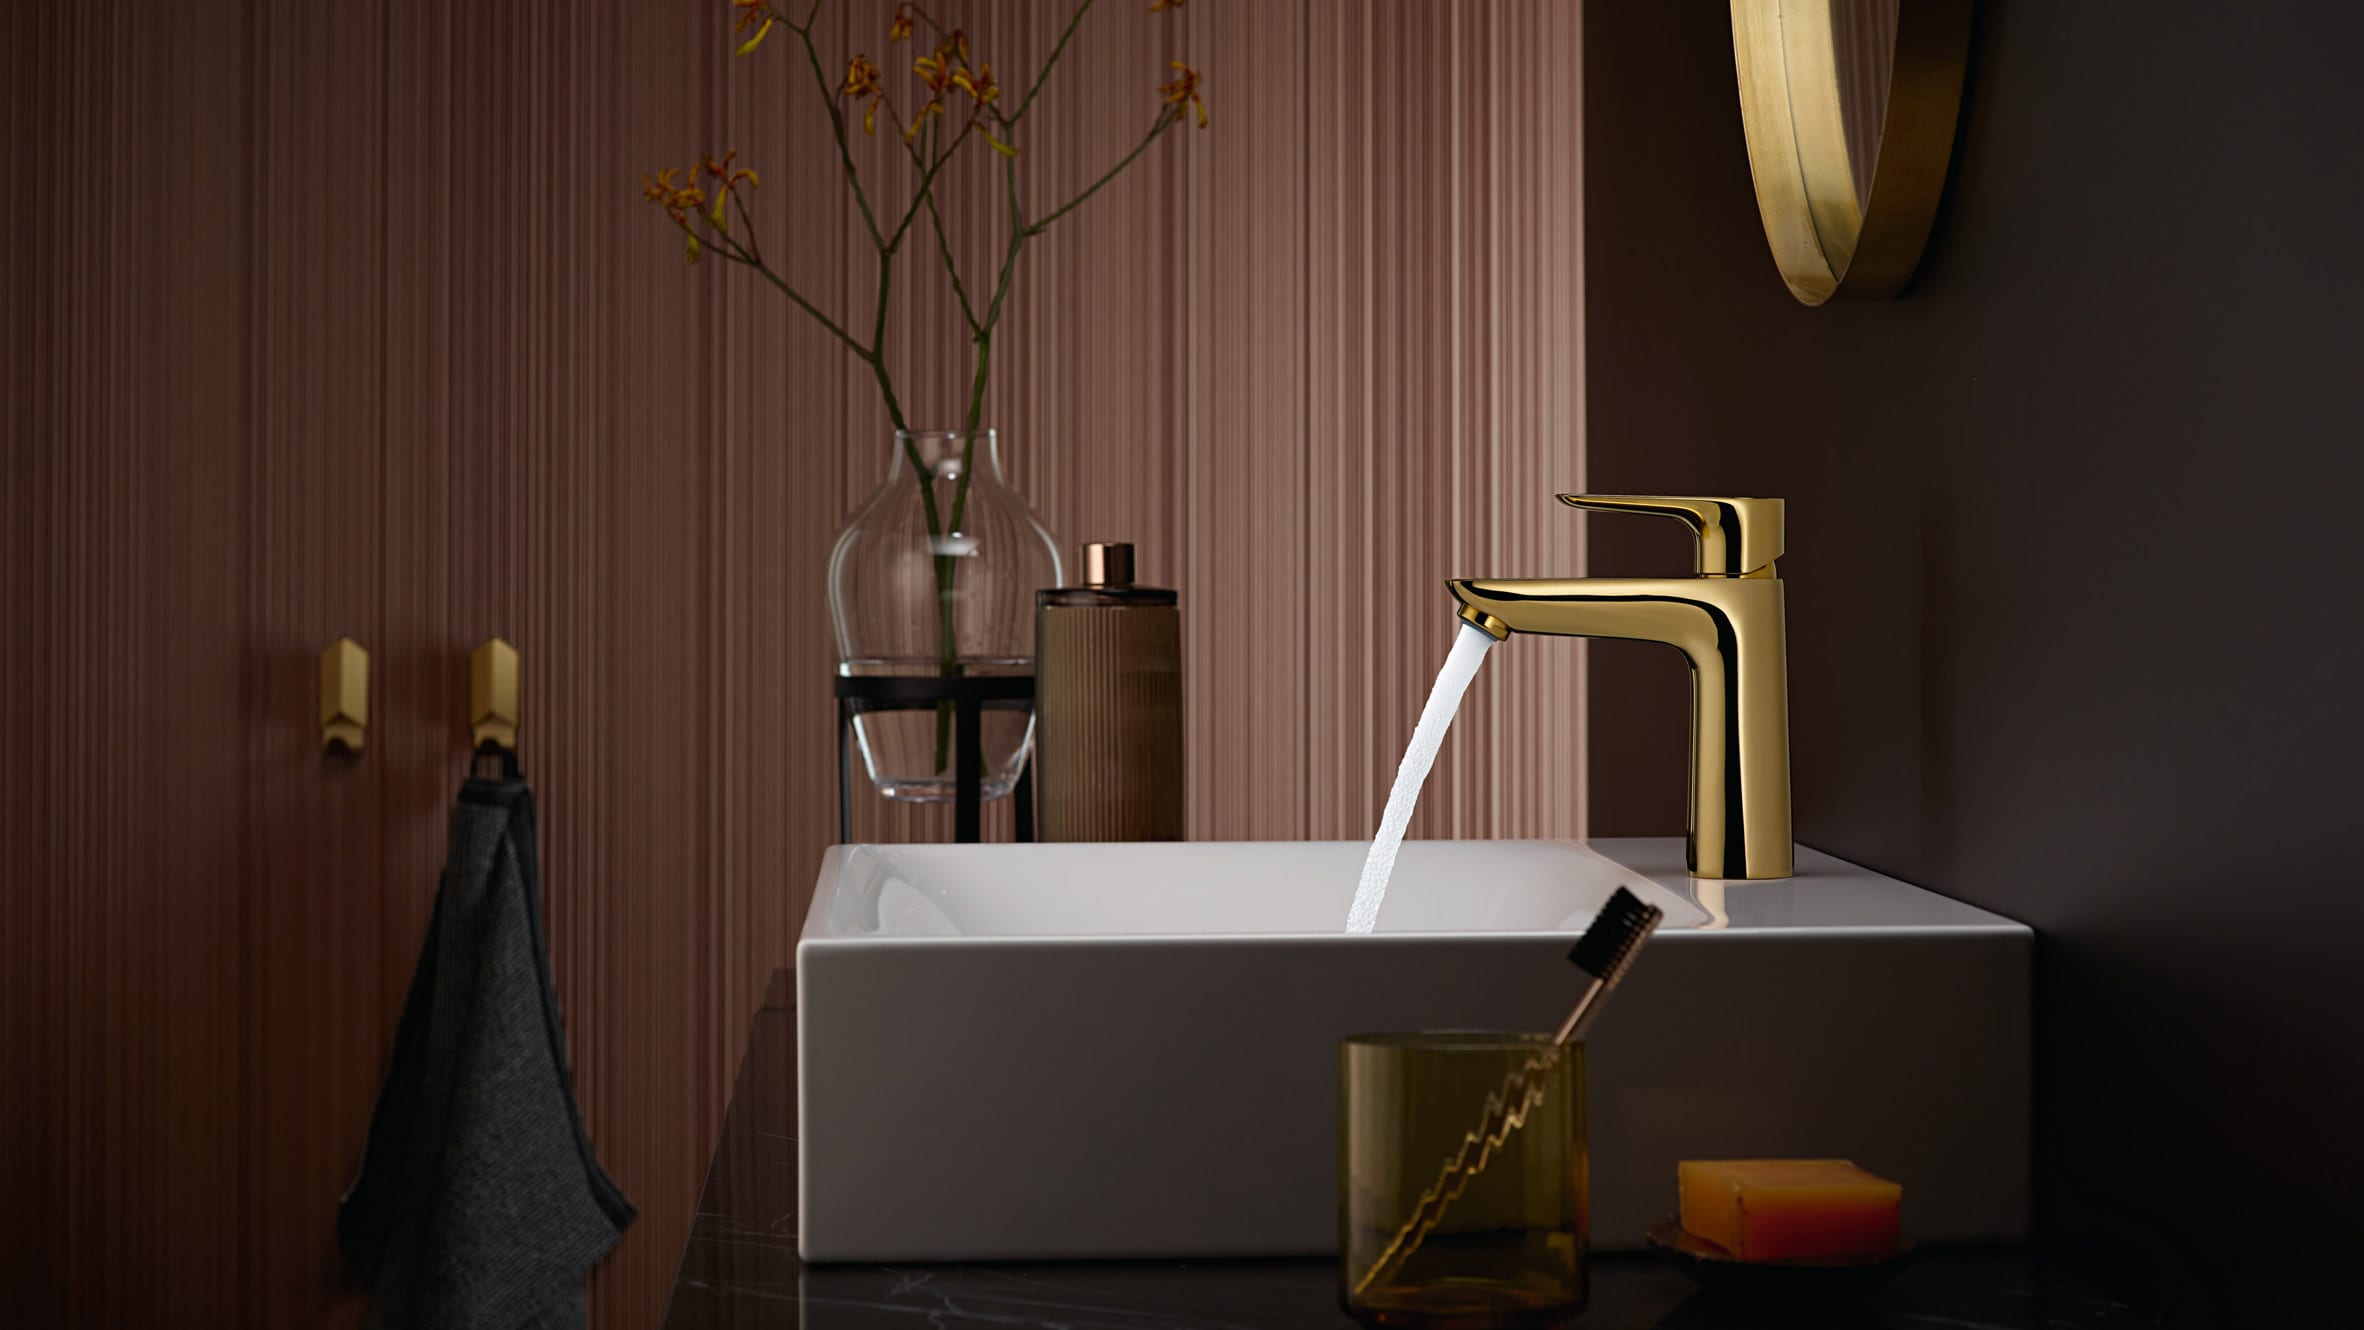 Hansgrohe reflects on 120 years of kitchen and bathroom innovation